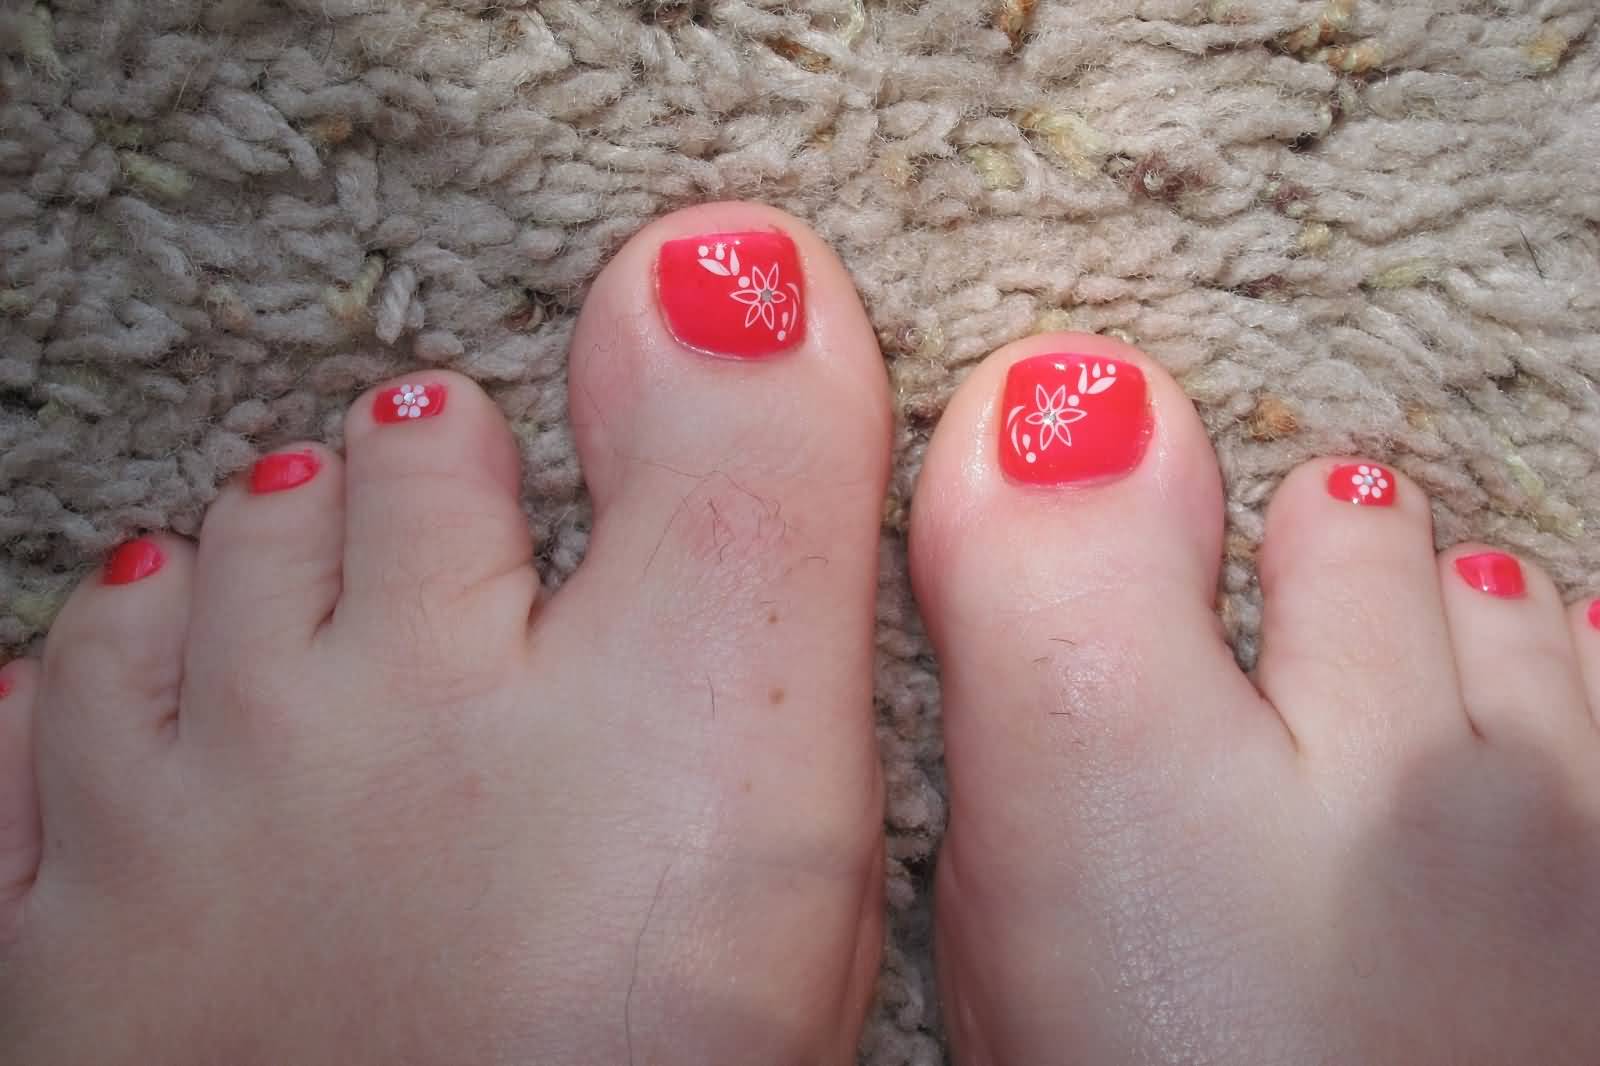 Simple Toe Nail Art With White Floral Design Idea